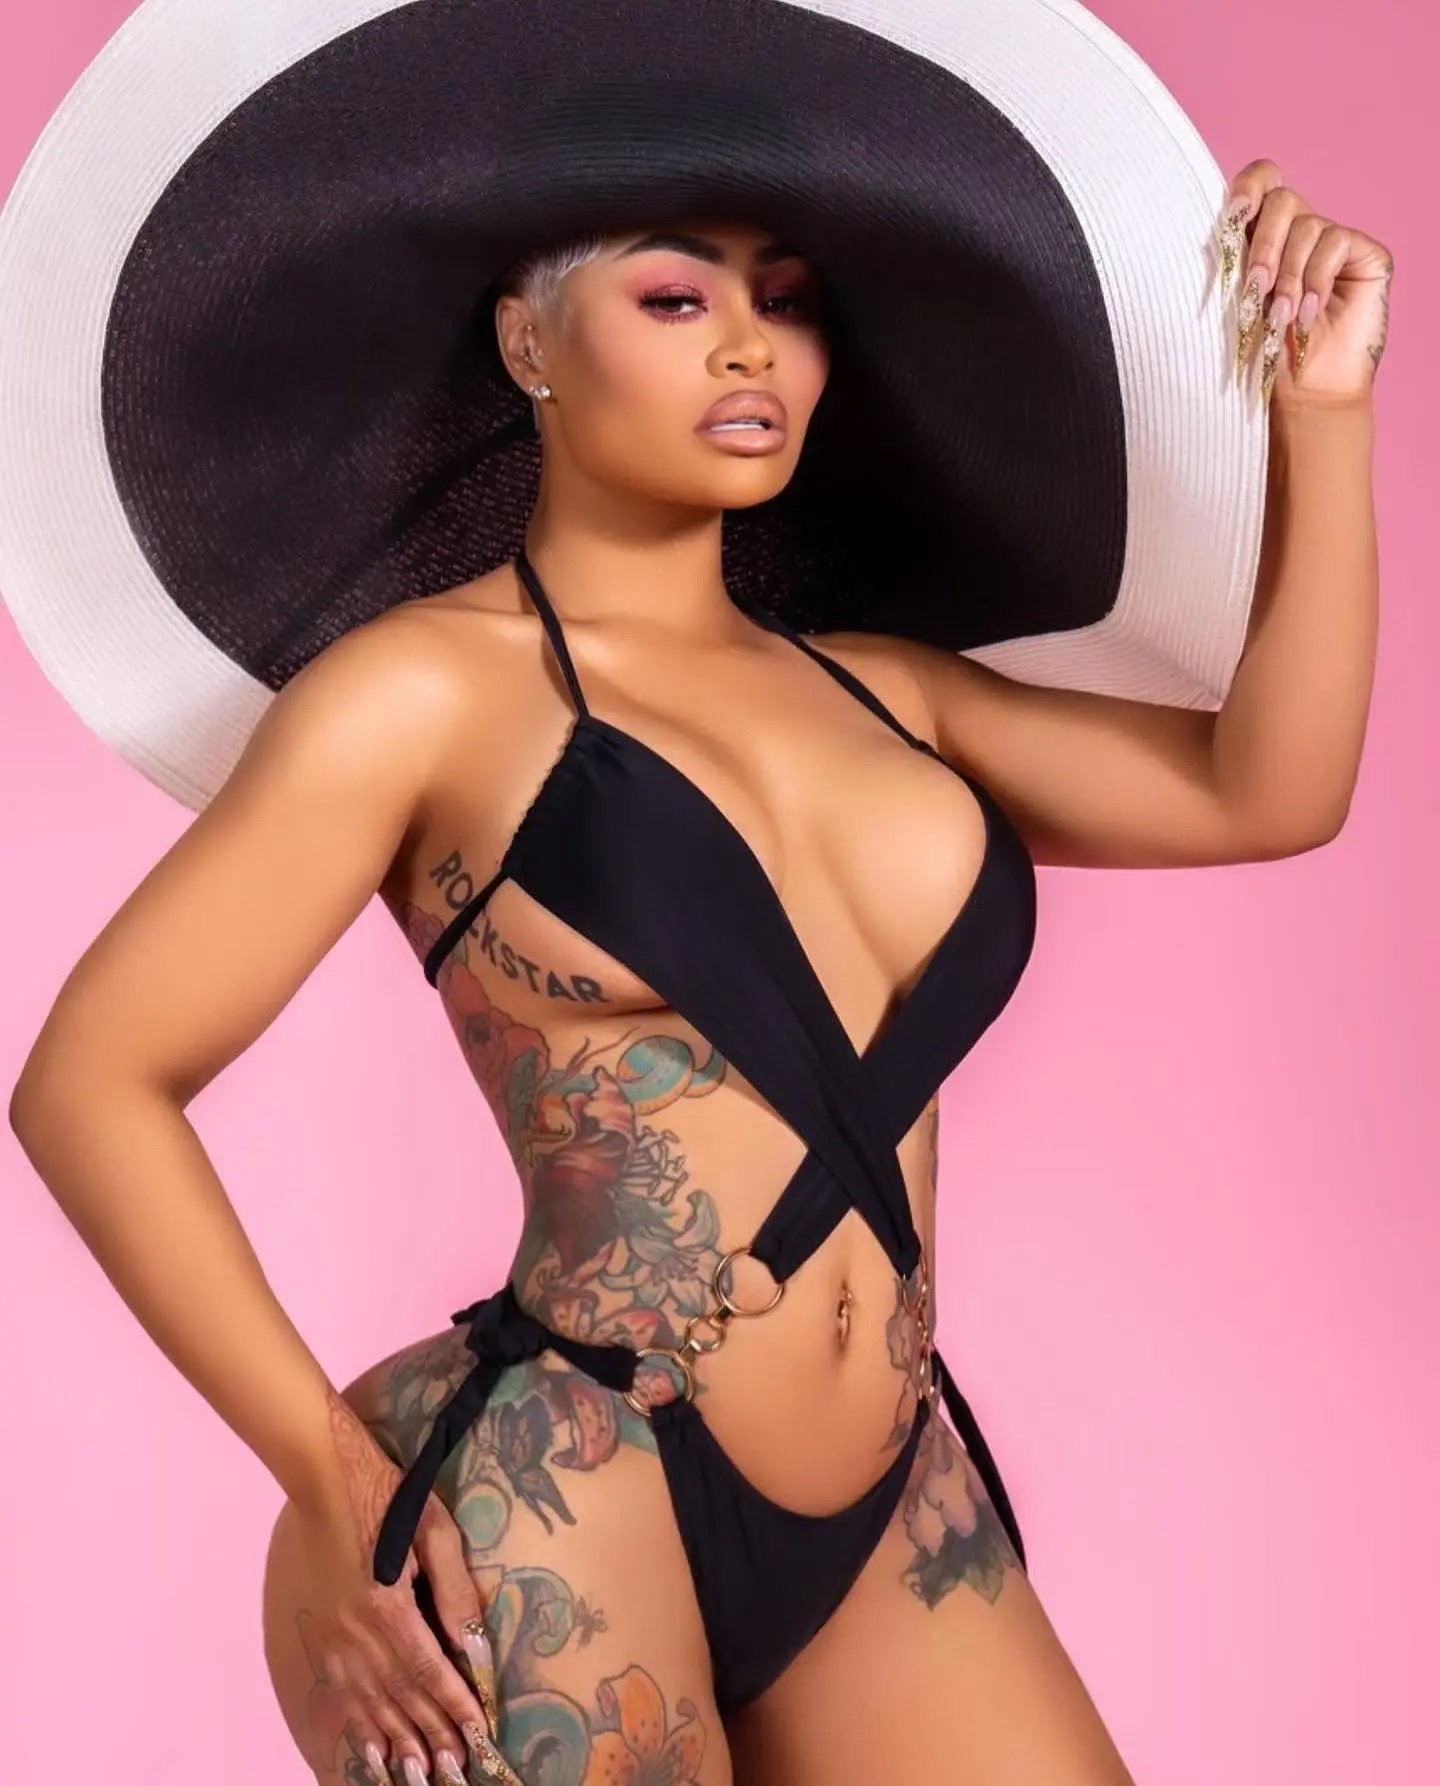 Blac Chyna - Free sexy pics, galleries & more at Babepedia